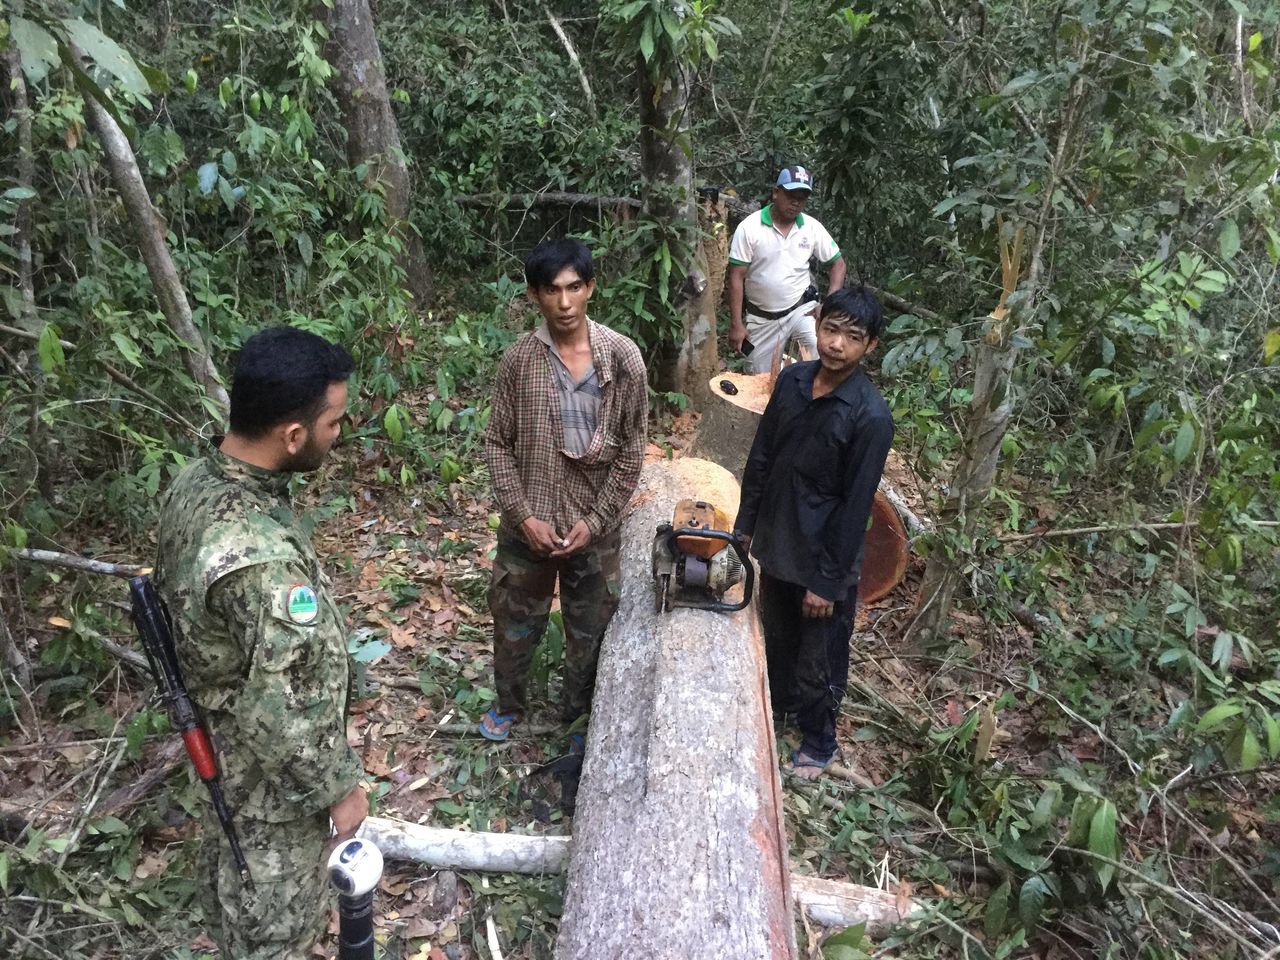 PLCN patrollers catch illegal loggers cutting down trees in the Prey Lang.